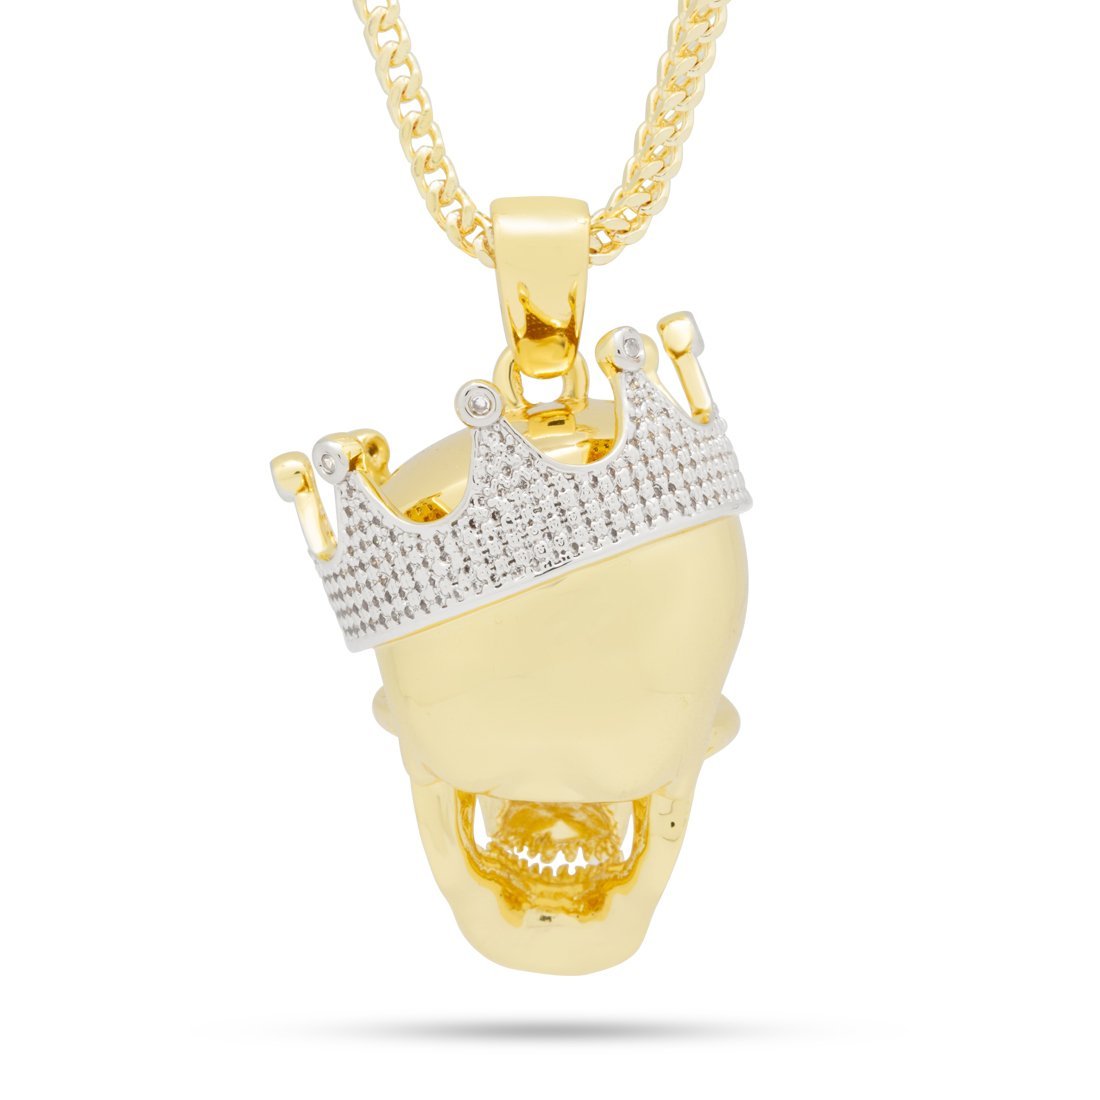 14K Gold The Skull King Necklace NKX14004